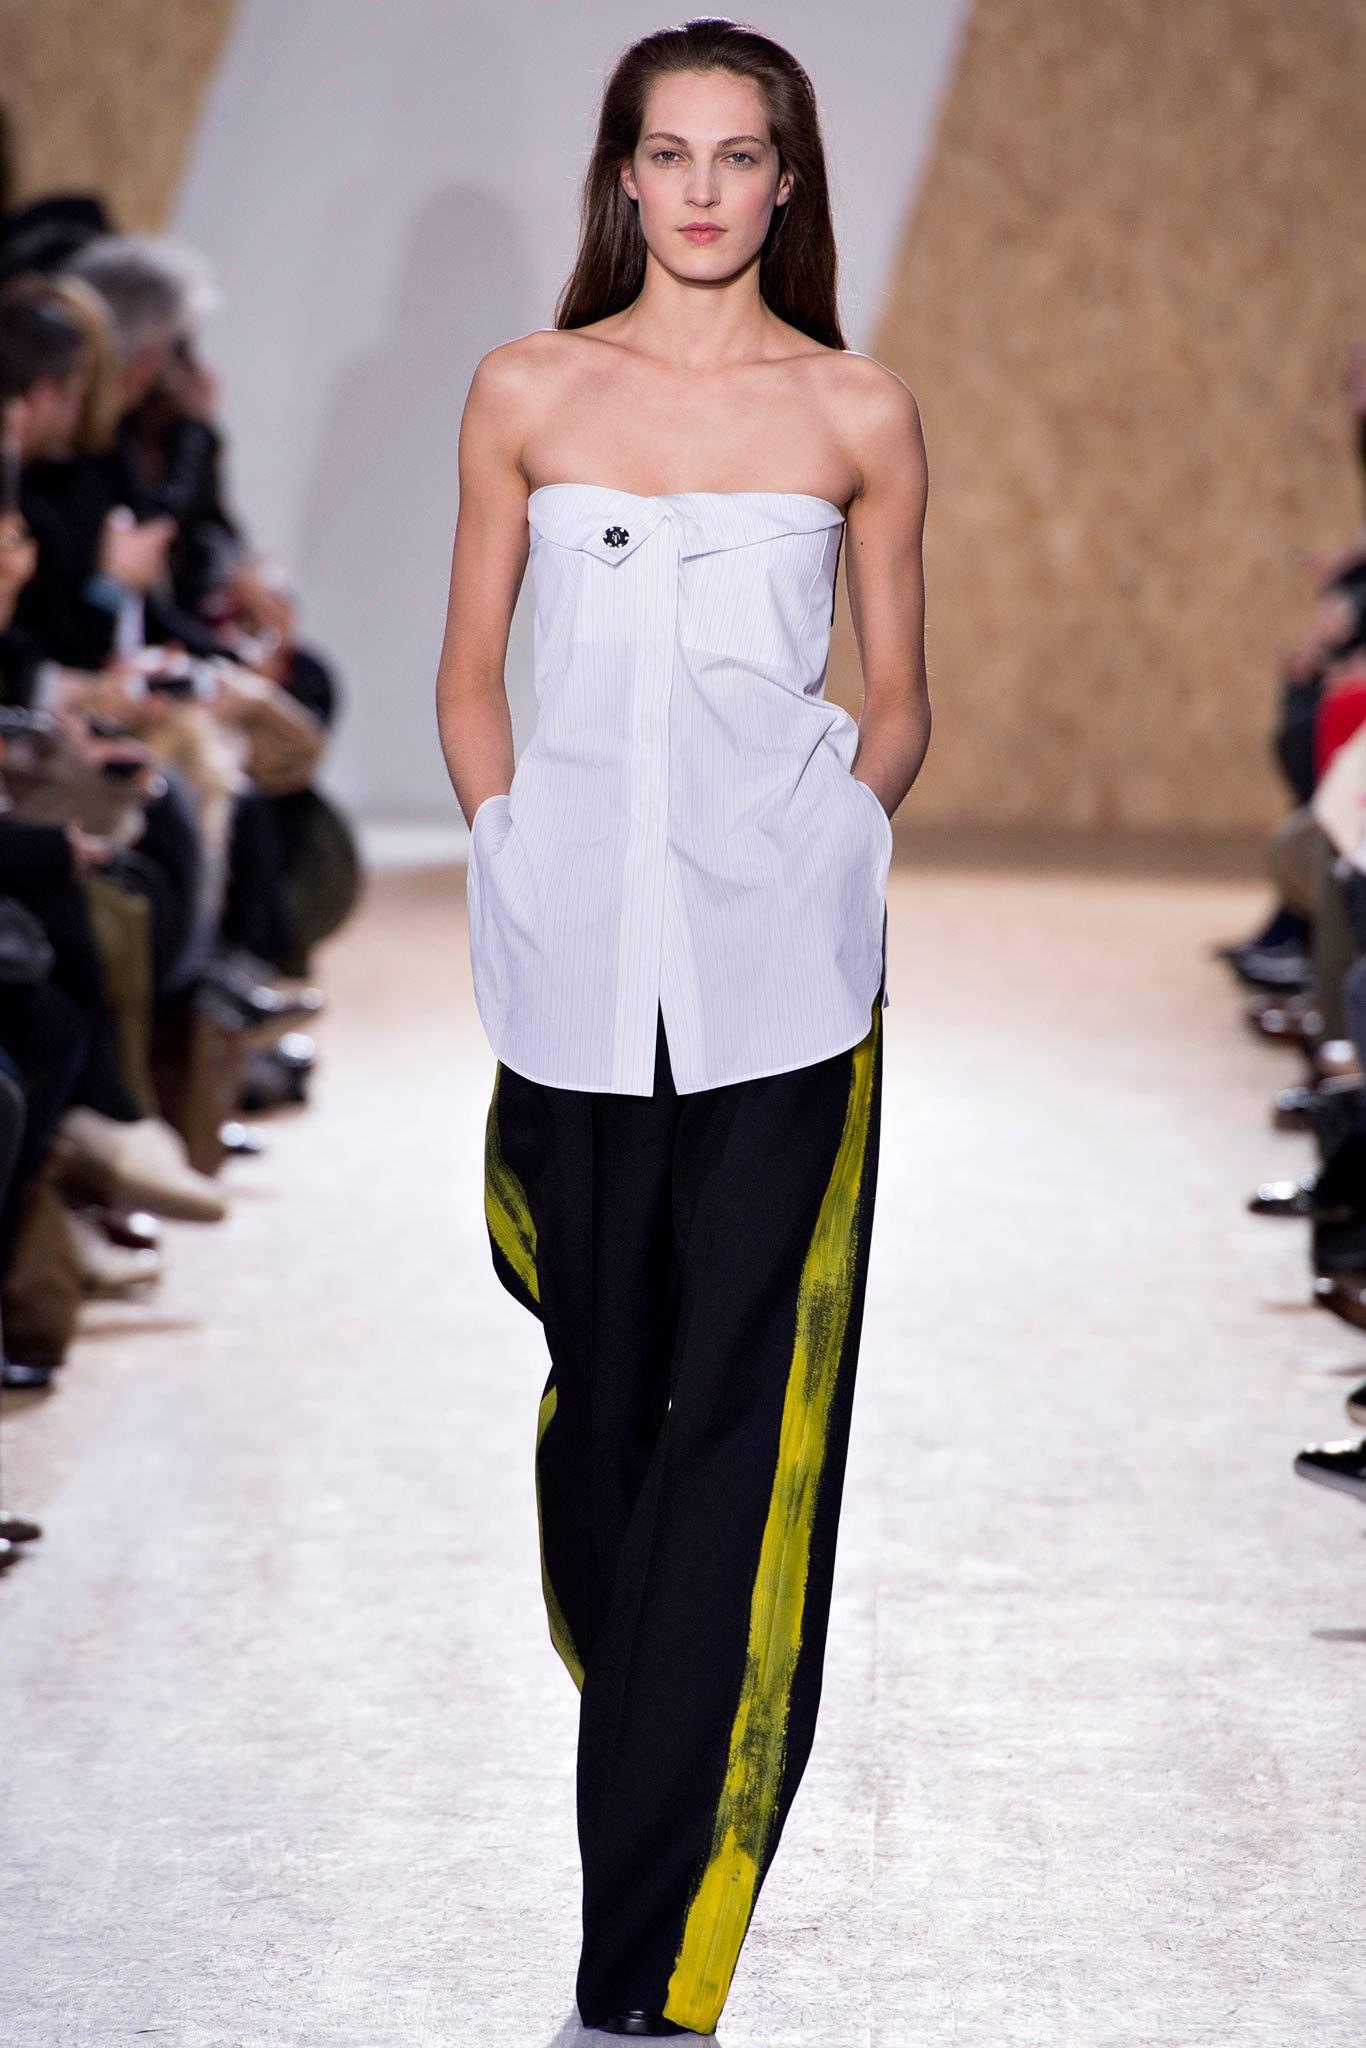 Maison Martin Margiela fall 2013 lead runway trousers and as seen on Miley Cyrus. Matching runway jacket available in a separate 1stdibs listing. Black wide leg design with high waist. Side hip pockets, pleated at waist. Yellow painted design down